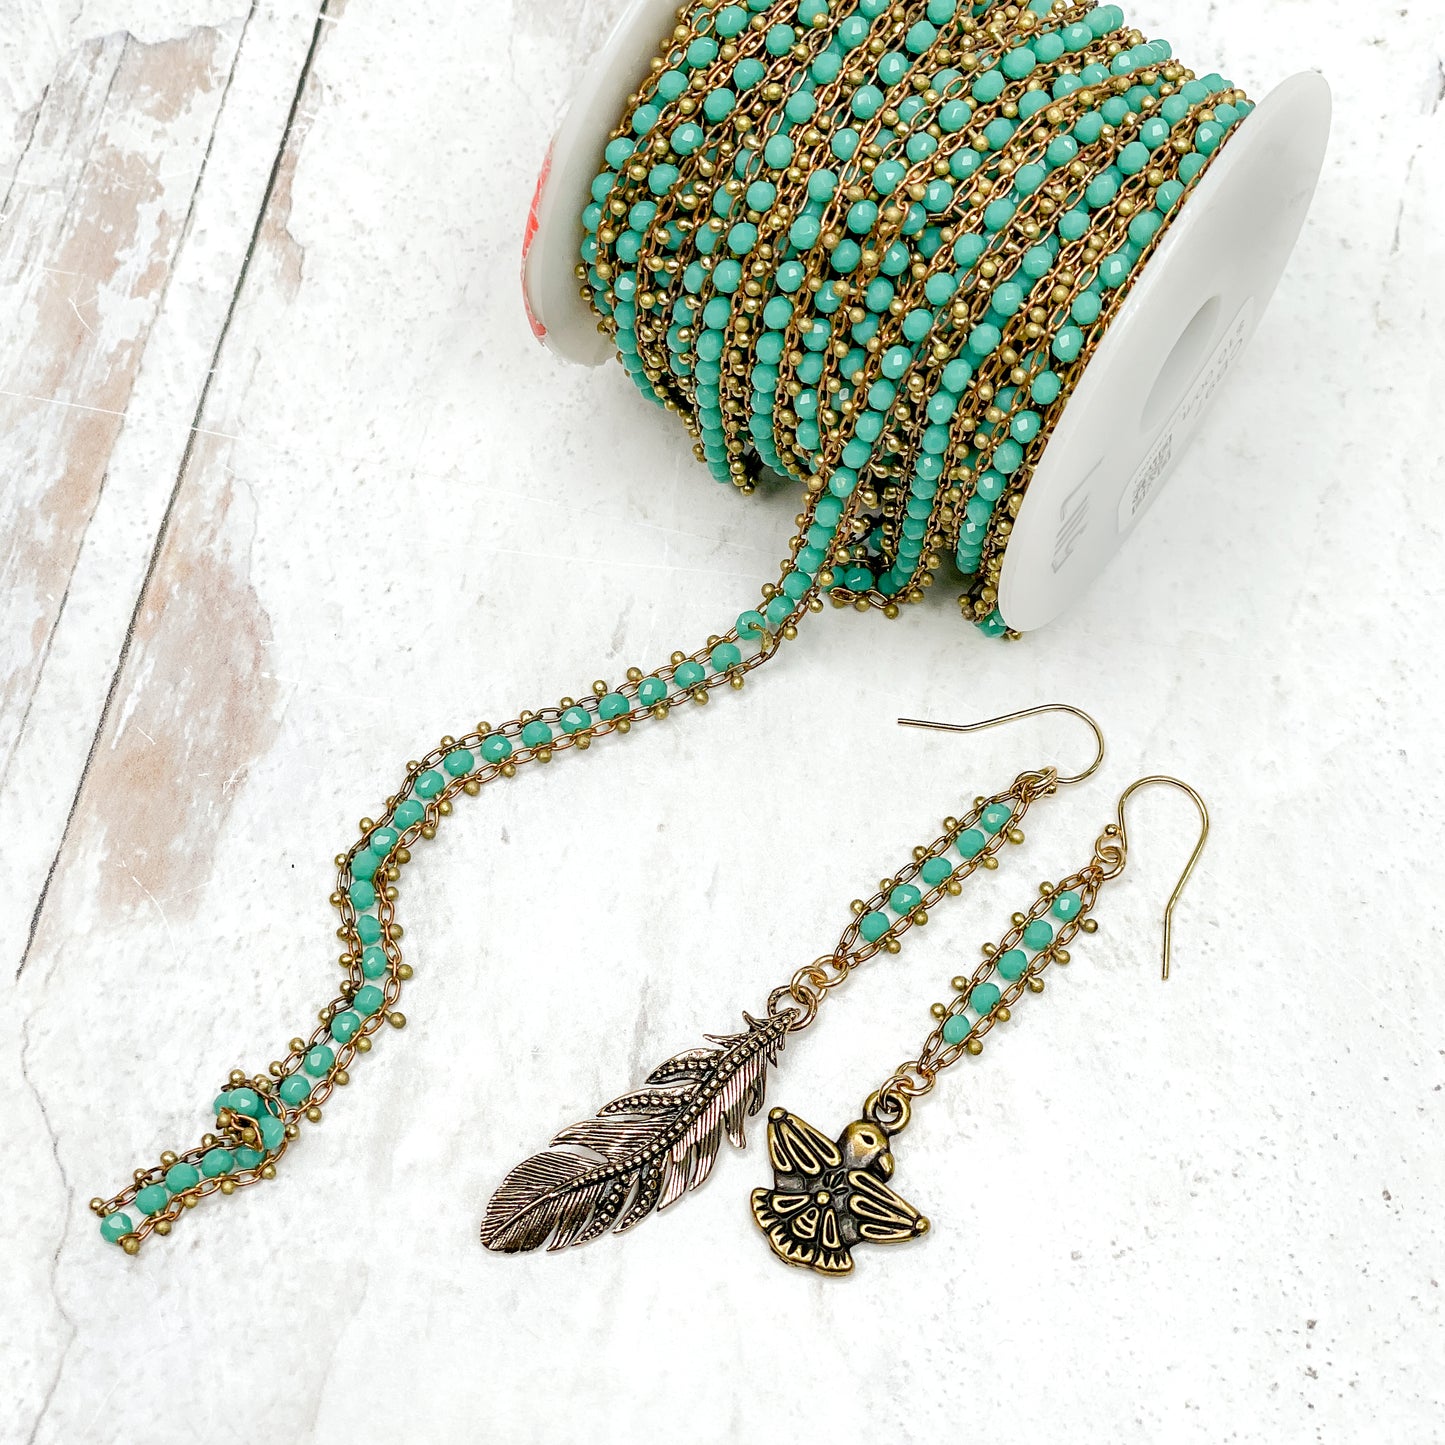 Beaded Ribbon Chain (Brass with Turquoise Glass Beads) - 1 ft.